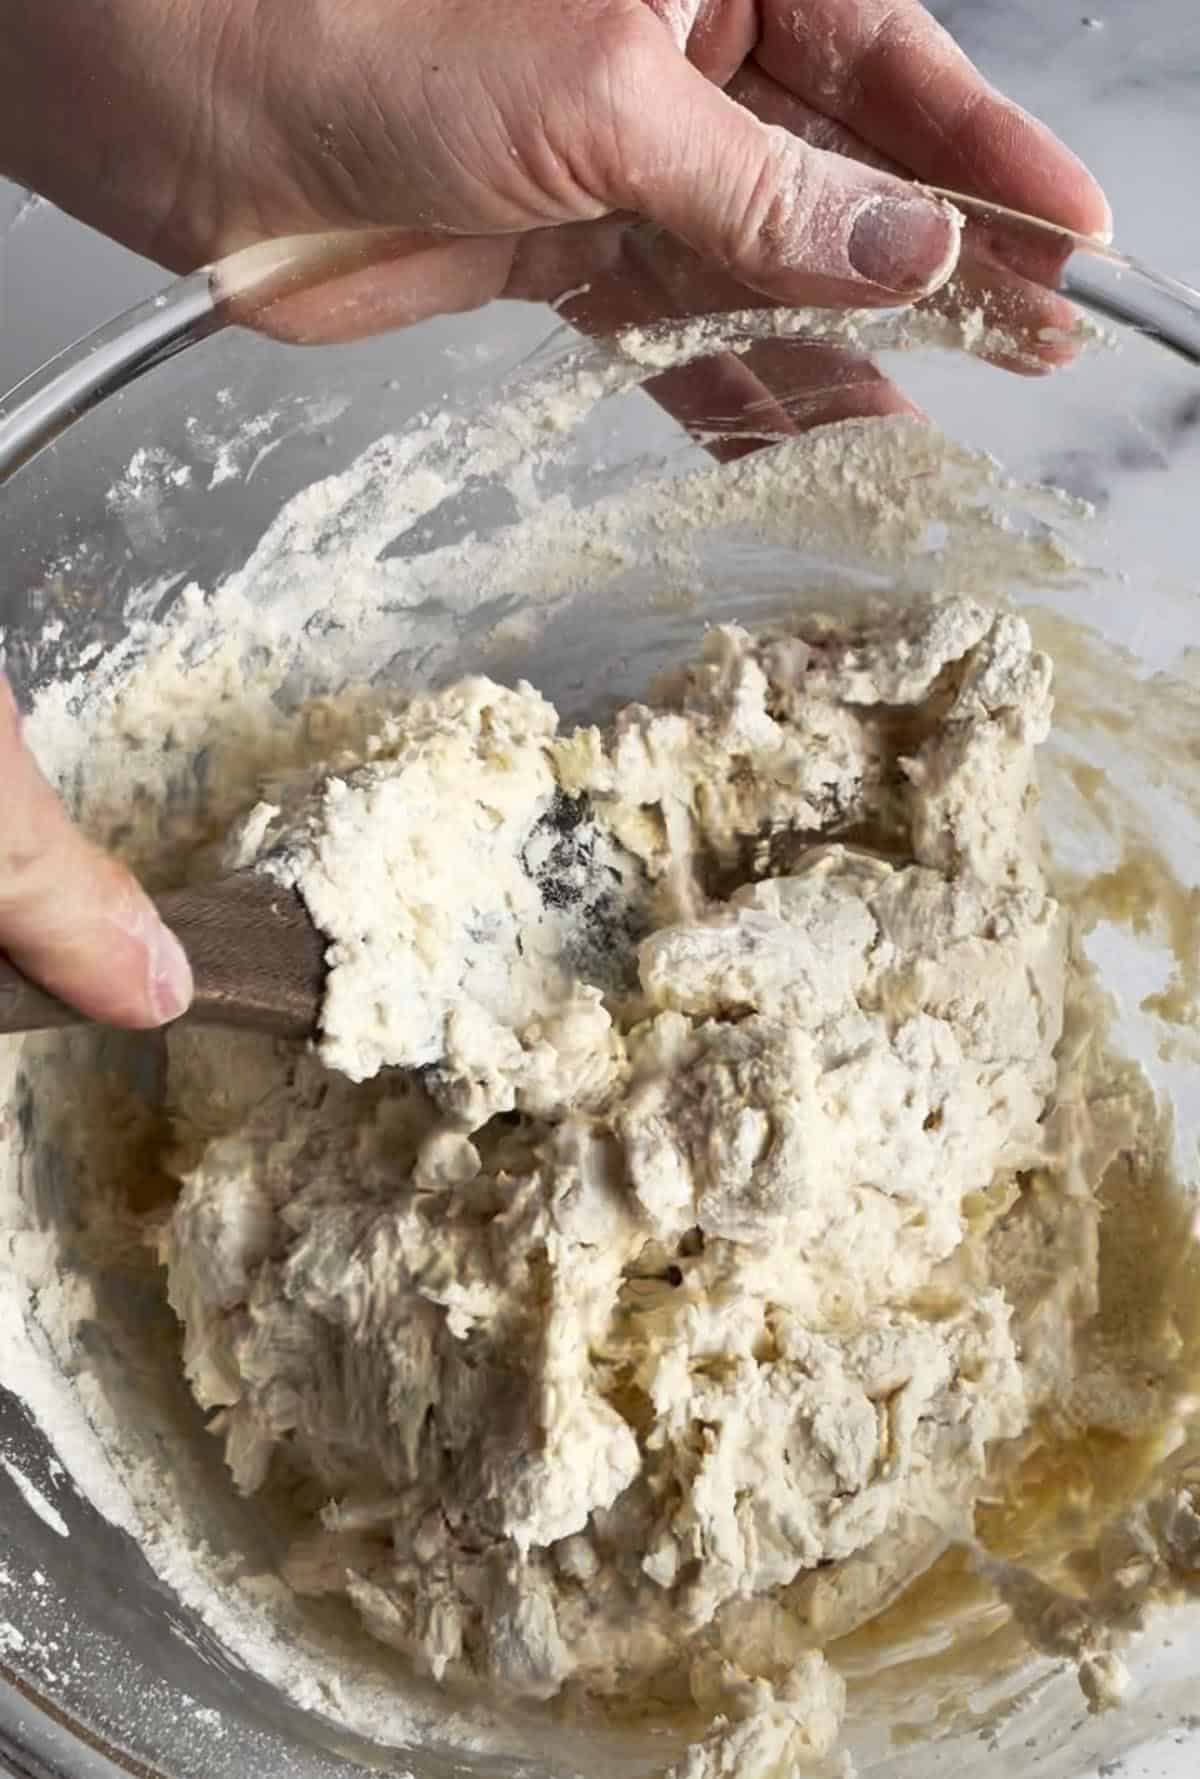 A glass bowl and wooden spoon mixing together scone dough.